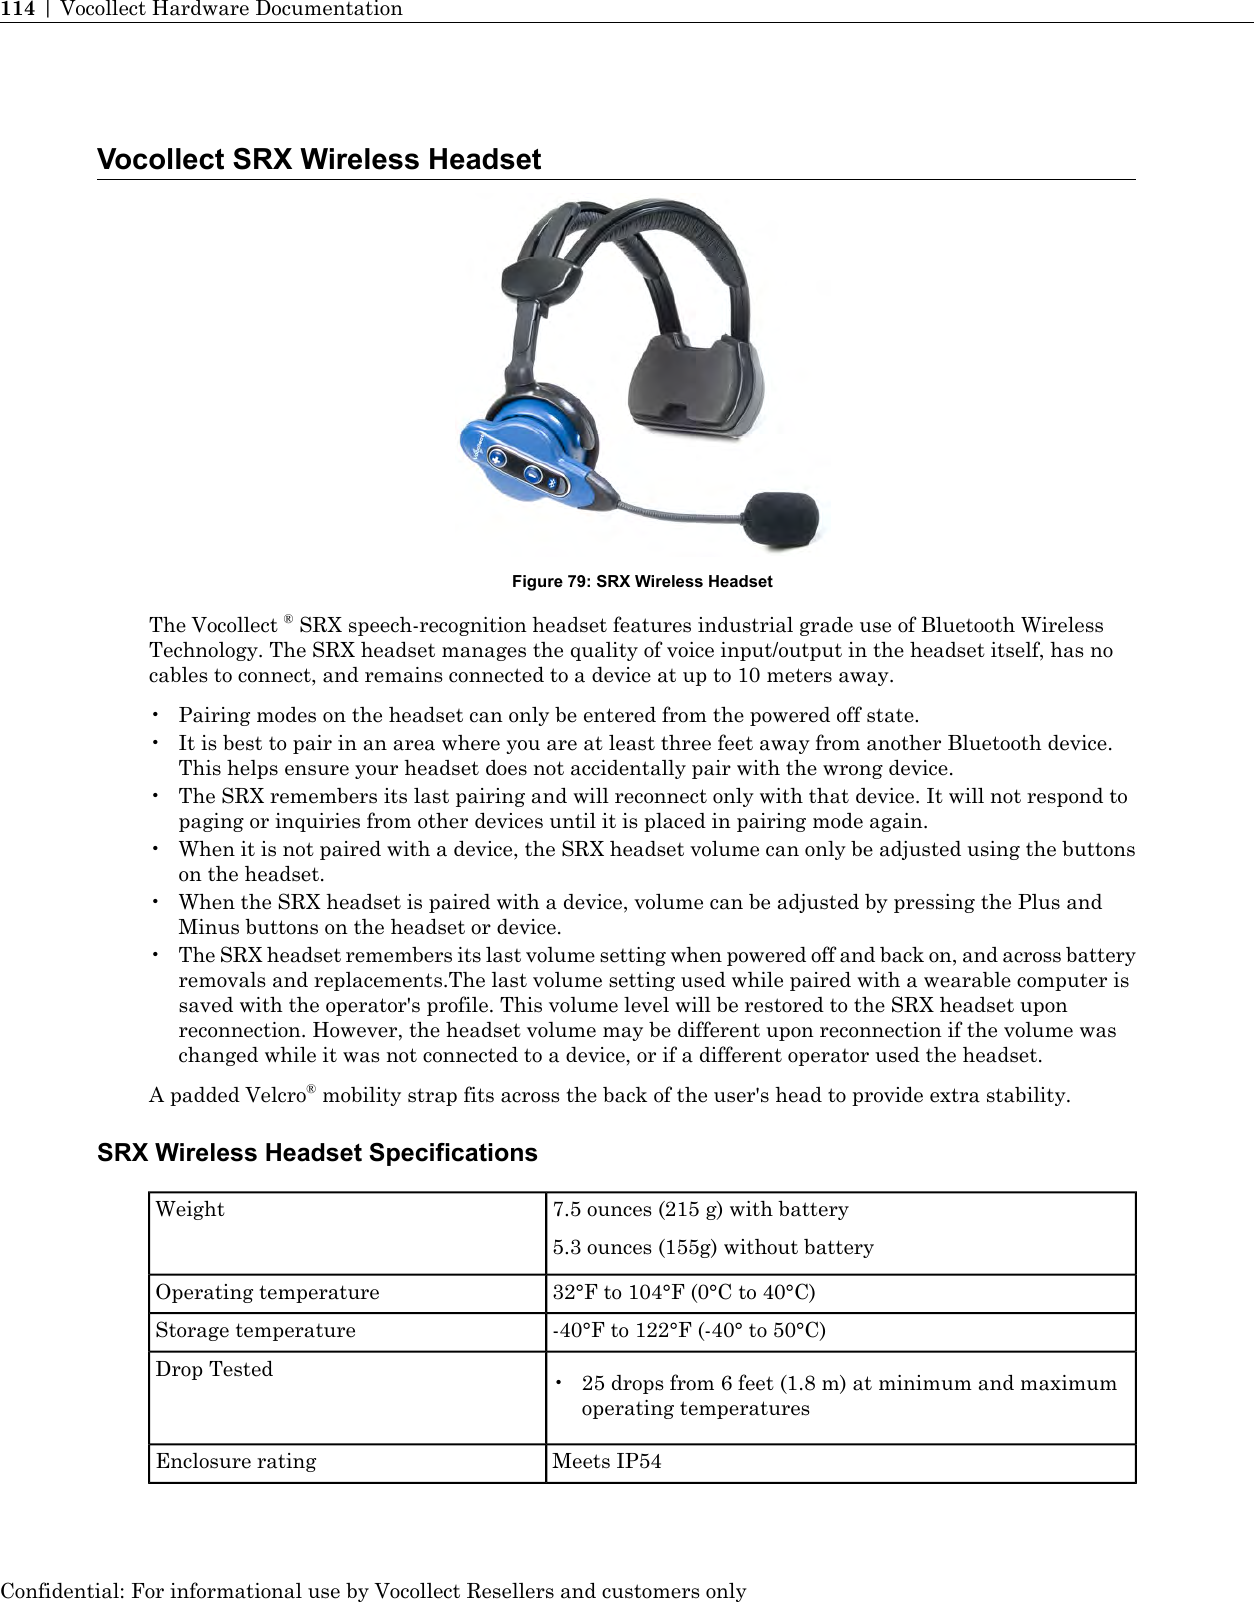 Vocollect SRX Wireless HeadsetFigure 79: SRX Wireless HeadsetThe Vocollect ®SRX speech-recognition headset features industrial grade use of Bluetooth WirelessTechnology. The SRX headset manages the quality of voice input/output in the headset itself, has nocables to connect, and remains connected to a device at up to 10 meters away.• Pairing modes on the headset can only be entered from the powered off state.• It is best to pair in an area where you are at least three feet away from another Bluetooth device.This helps ensure your headset does not accidentally pair with the wrong device.• The SRX remembers its last pairing and will reconnect only with that device. It will not respond topaging or inquiries from other devices until it is placed in pairing mode again.• When it is not paired with a device, the SRX headset volume can only be adjusted using the buttonson the headset.• When the SRX headset is paired with a device, volume can be adjusted by pressing the Plus andMinus buttons on the headset or device.•The SRX headset remembers its last volume setting when powered off and back on, and across batteryremovals and replacements.The last volume setting used while paired with a wearable computer issaved with the operator&apos;s profile. This volume level will be restored to the SRX headset uponreconnection. However, the headset volume may be different upon reconnection if the volume waschanged while it was not connected to a device, or if a different operator used the headset.A padded Velcro®mobility strap fits across the back of the user&apos;s head to provide extra stability.SRX Wireless Headset Specifications7.5 ounces (215 g) with battery5.3 ounces (155g) without batteryWeight32°F to 104°F (0°C to 40°C)Operating temperature-40°F to 122°F (-40° to 50°C)Storage temperatureDrop Tested • 25 drops from 6 feet (1.8 m) at minimum and maximumoperating temperaturesMeets IP54Enclosure ratingConfidential: For informational use by Vocollect Resellers and customers only114 | Vocollect Hardware Documentation